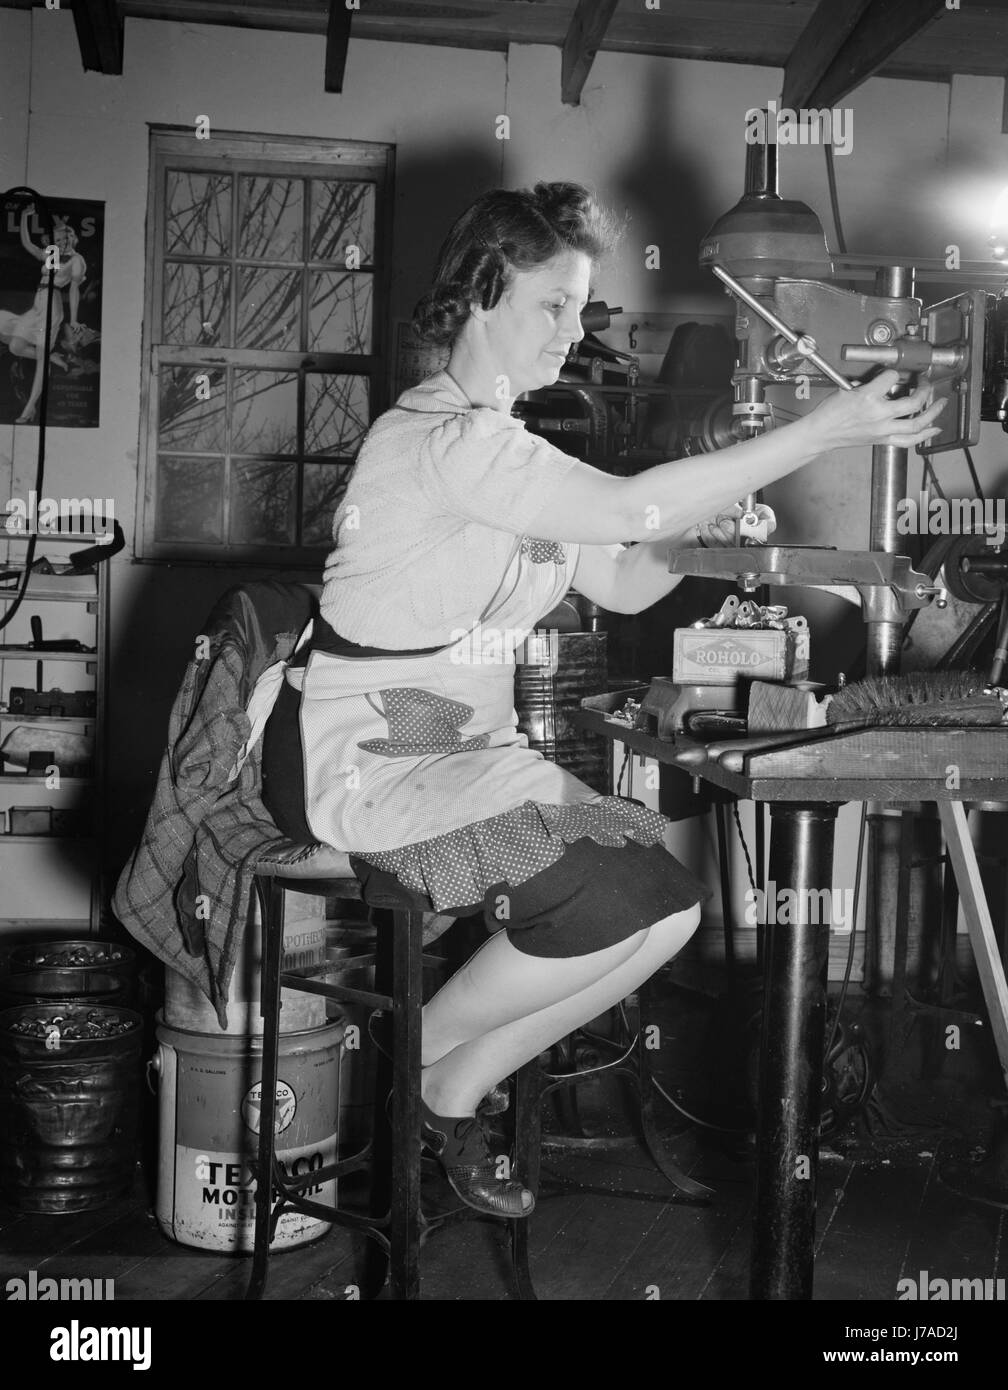 A woman machinist places screws into electric terminals in her workshop, 1942. Stock Photo